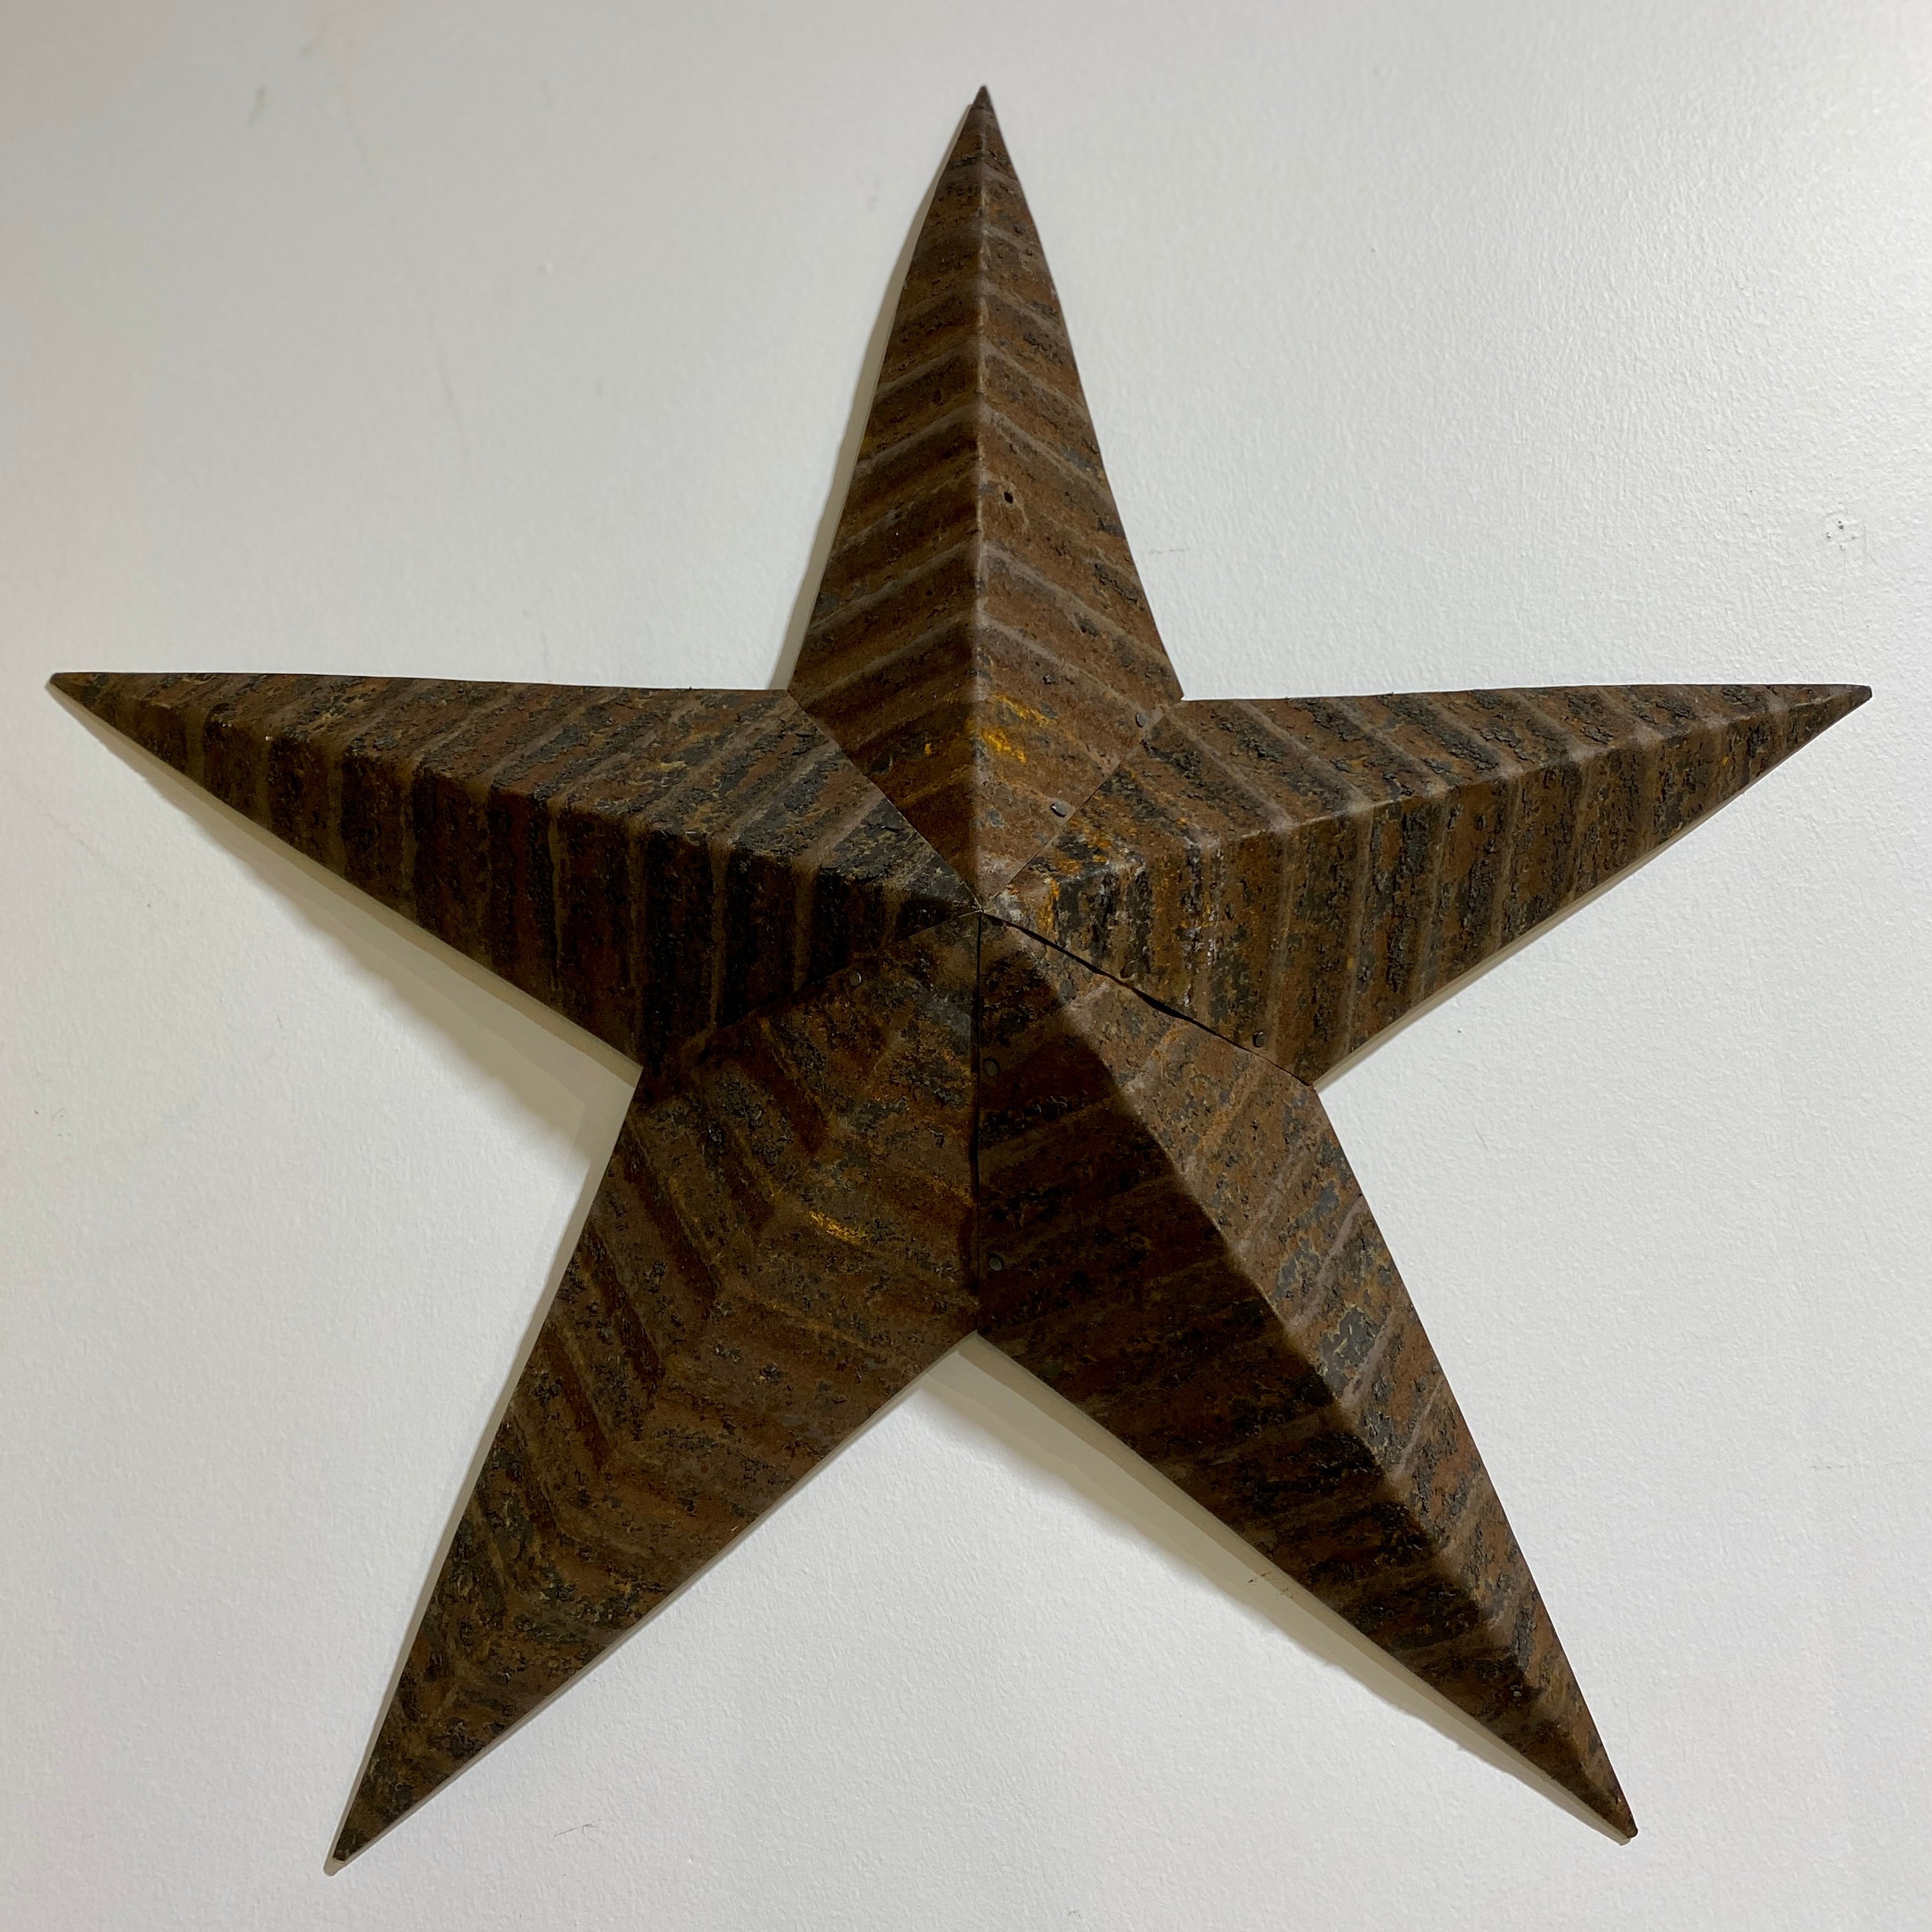 Authentic Amish Barn Star - large 75 CM DIAMETER - RUSTED IRON